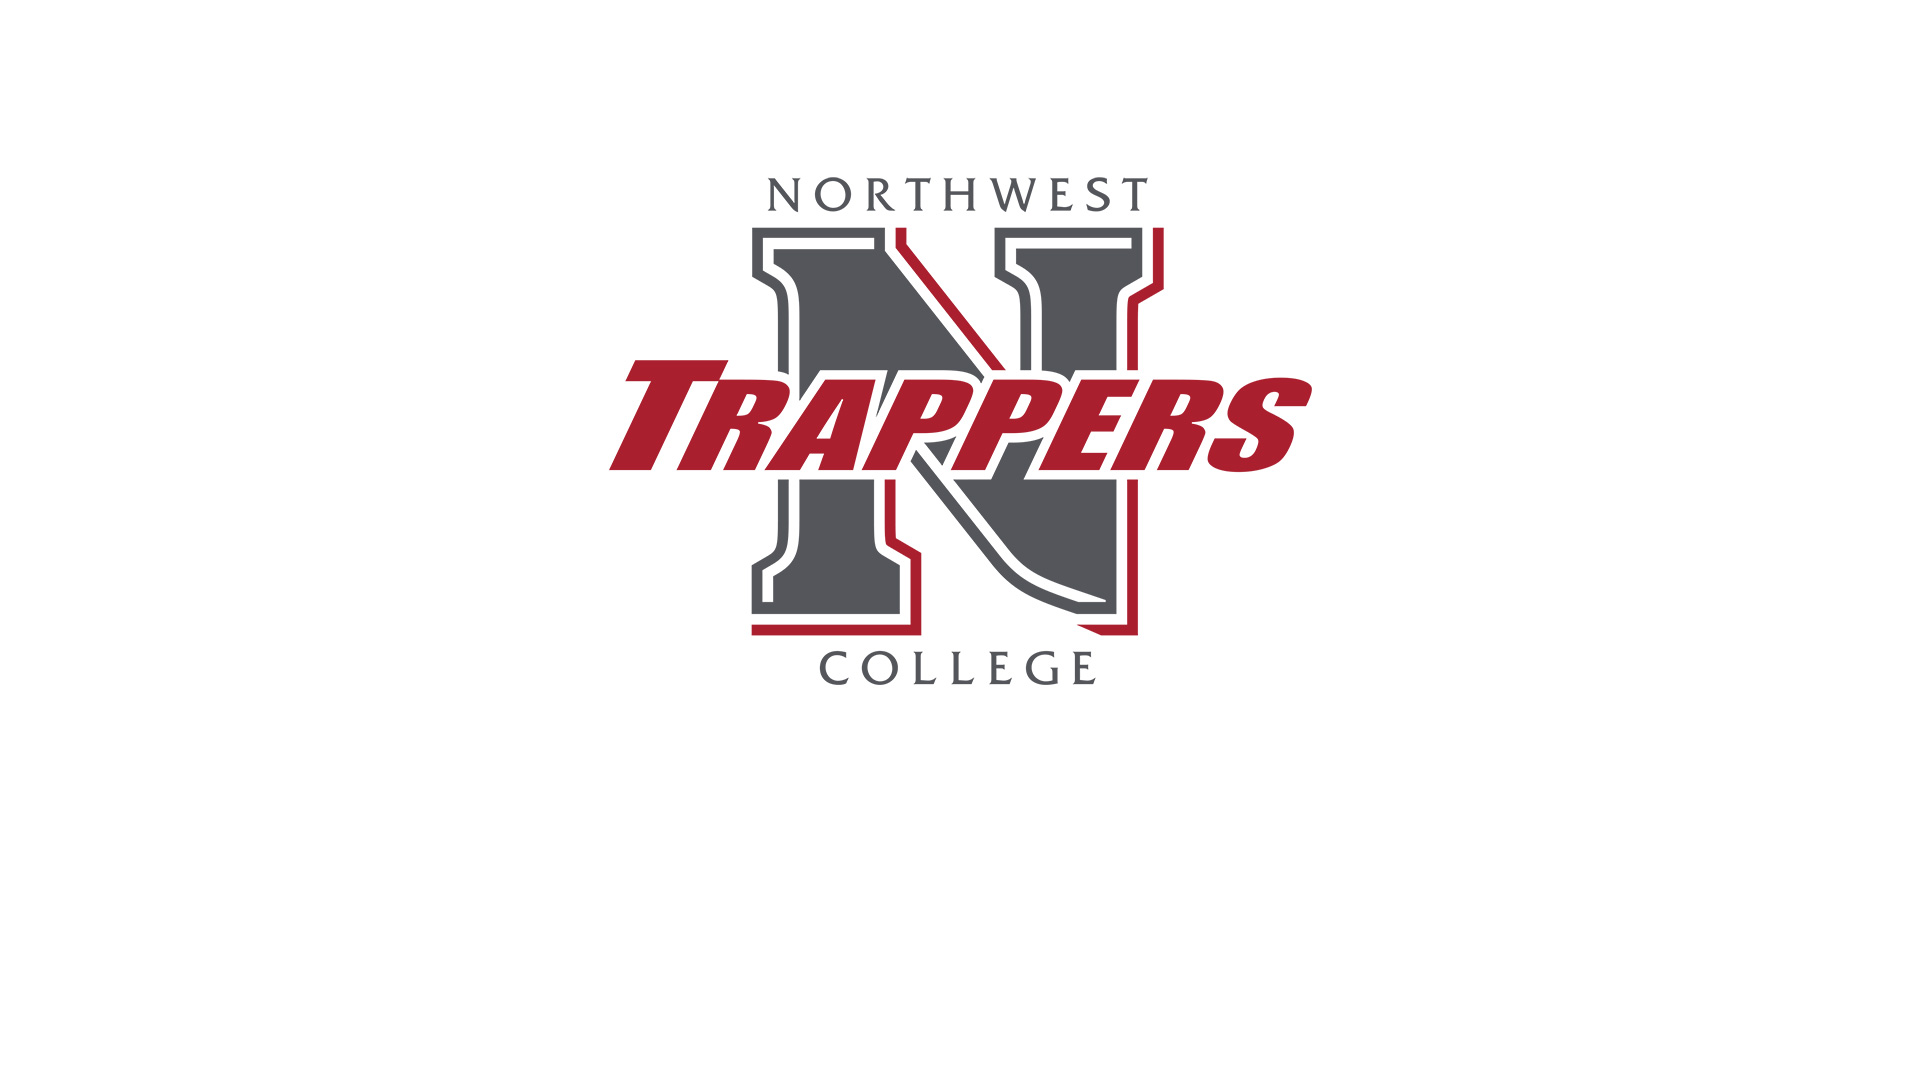 ESPORTS COMBINE FUN AND (VIDEO) GAMES AT NORTHWEST COLLEGE